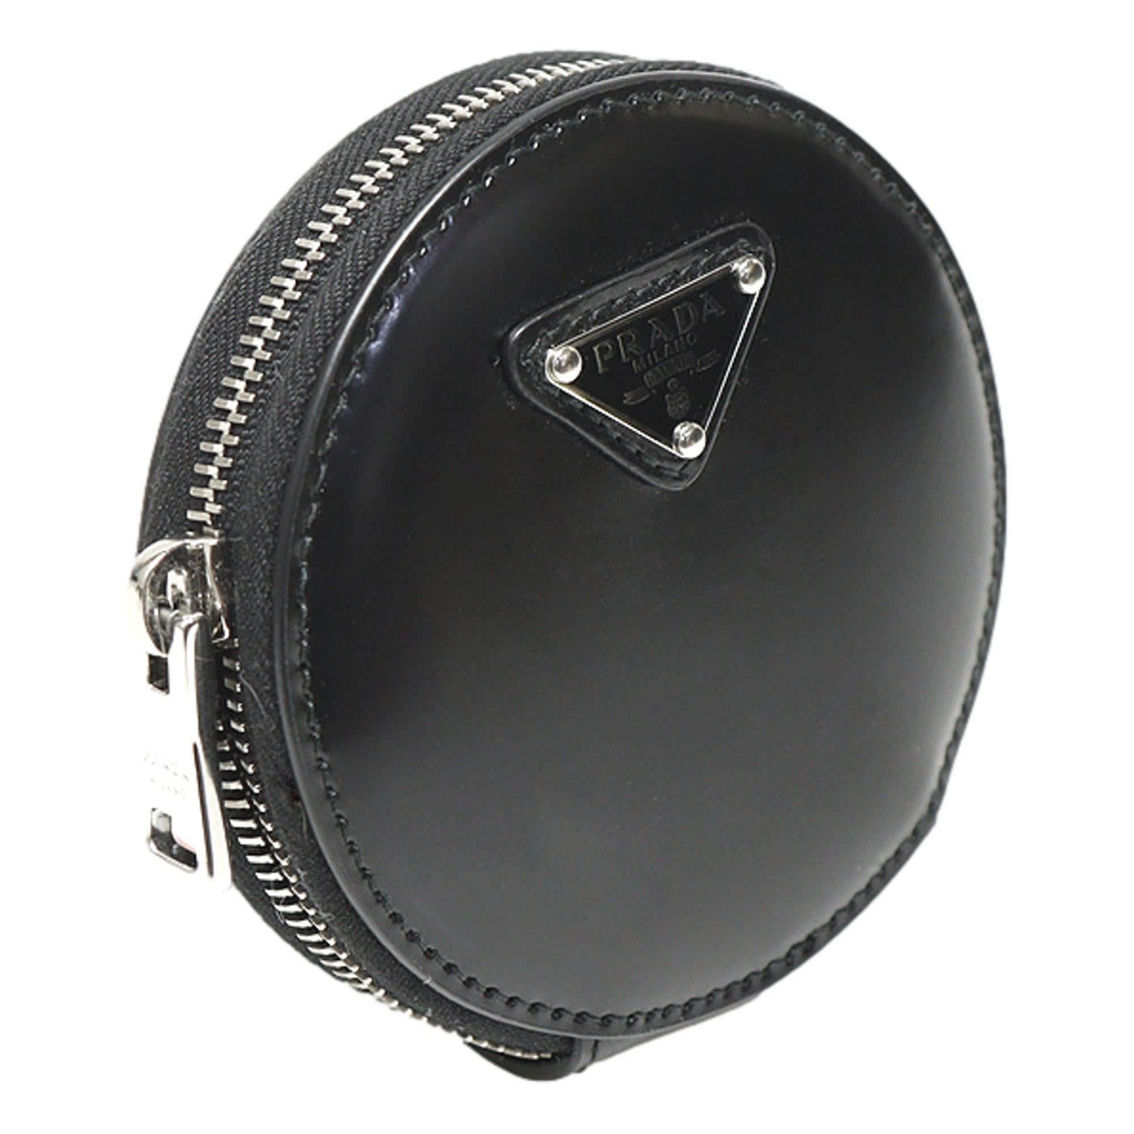 Prada Triangle Plaque Smooth Black Leather Round Mini Pouch Keychain (New) - Image 2 of 5